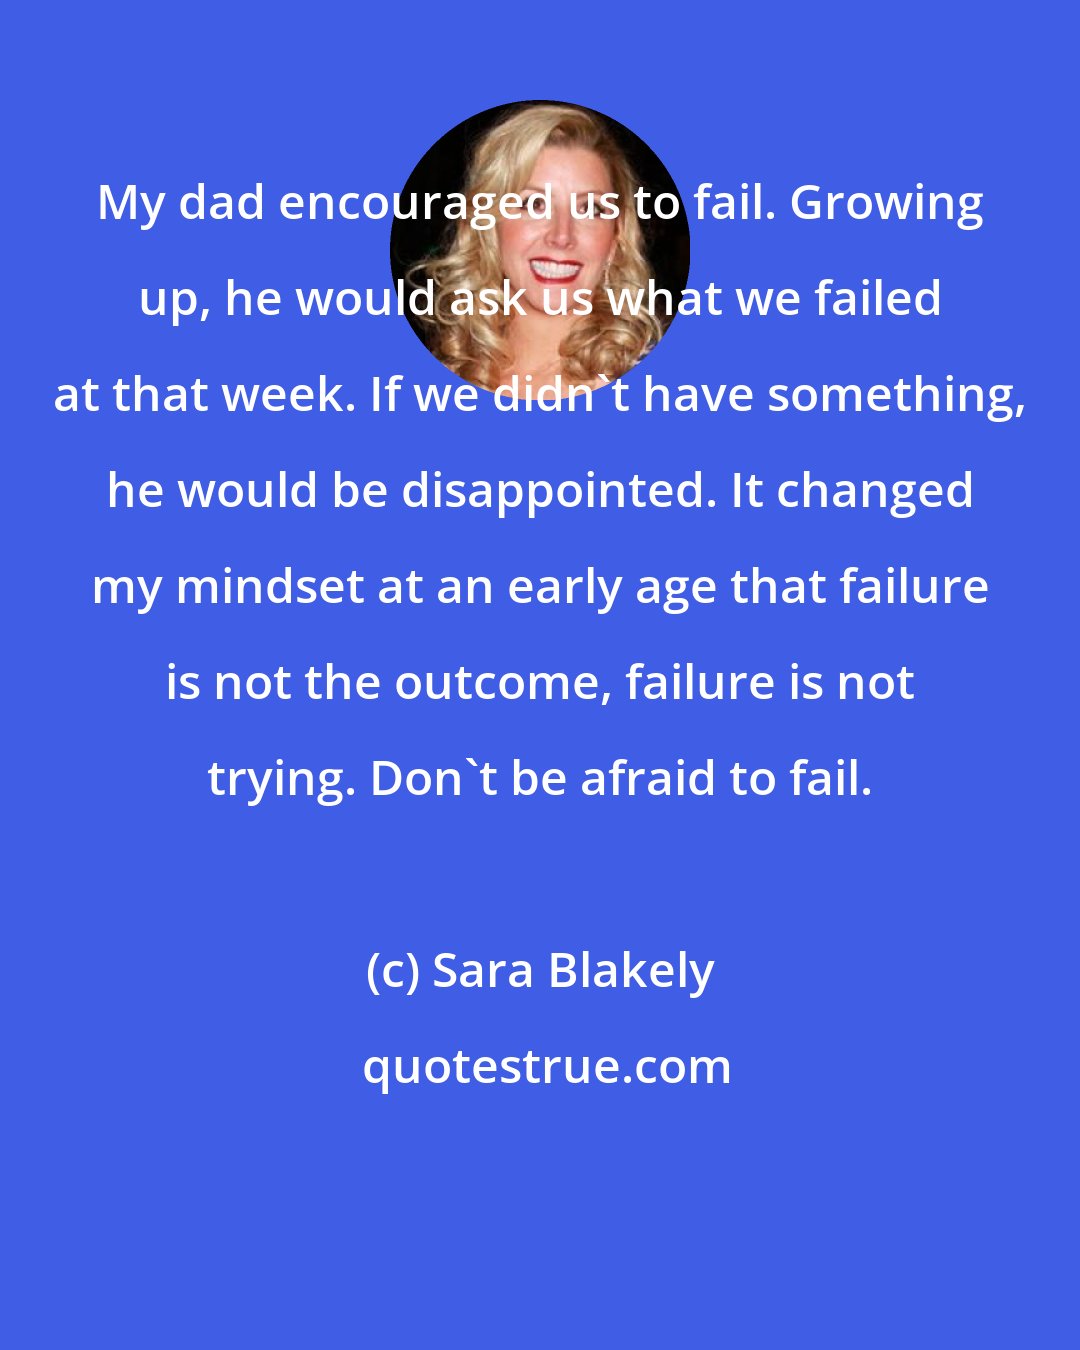 Sara Blakely: My dad encouraged us to fail. Growing up, he would ask us what we failed at that week. If we didn't have something, he would be disappointed. It changed my mindset at an early age that failure is not the outcome, failure is not trying. Don't be afraid to fail.